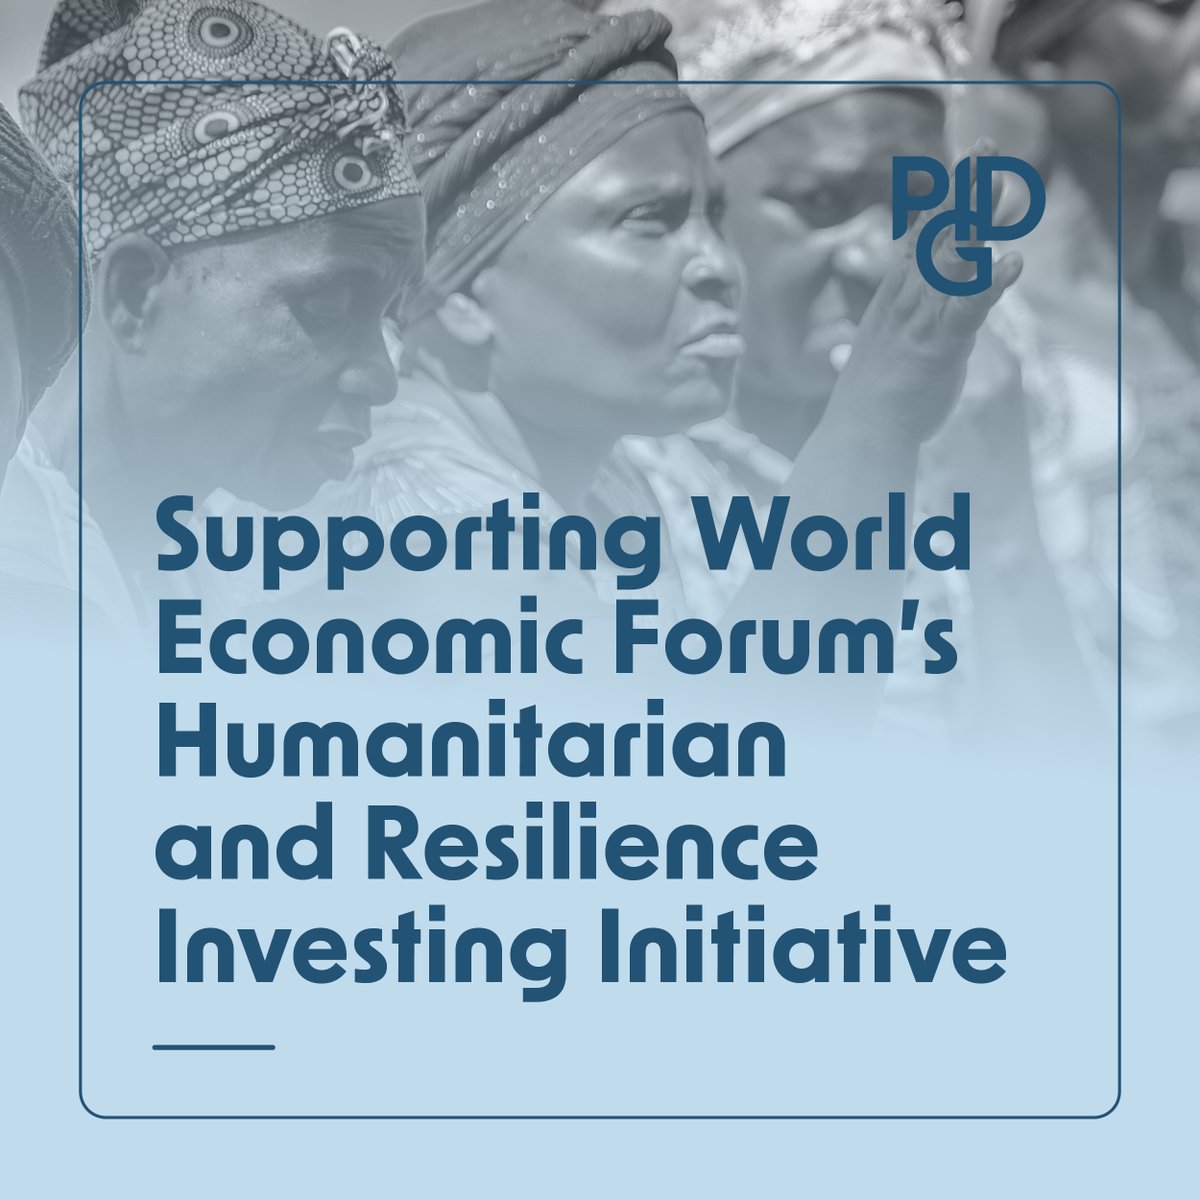 We’re delighted to be supporting @wef’s Humanitarian and Resilience Investing (#HRI) Initiative in a global call to action to unlock commercial and catalytic capital to enable 1,000 businesses in frontier markets to scale by 2030. Read more: bit.ly/3roJoJ2 #SDIM23